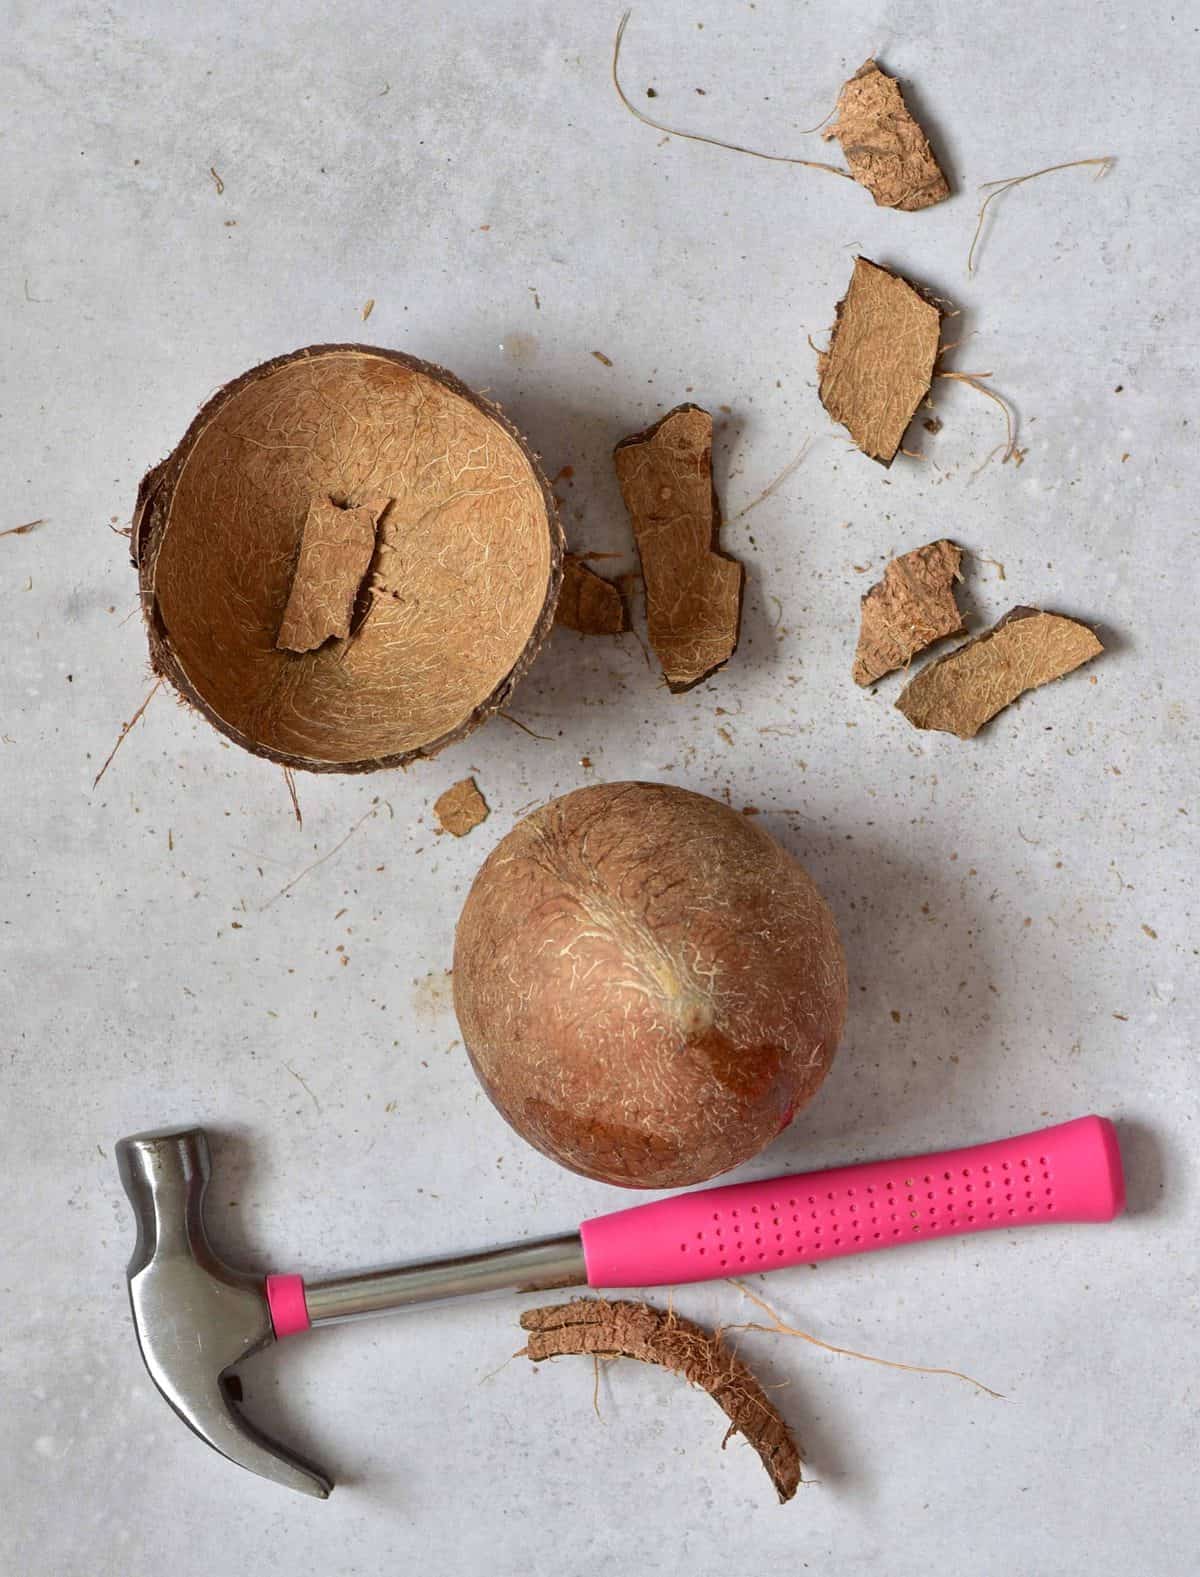 Coconut opened with a hammer